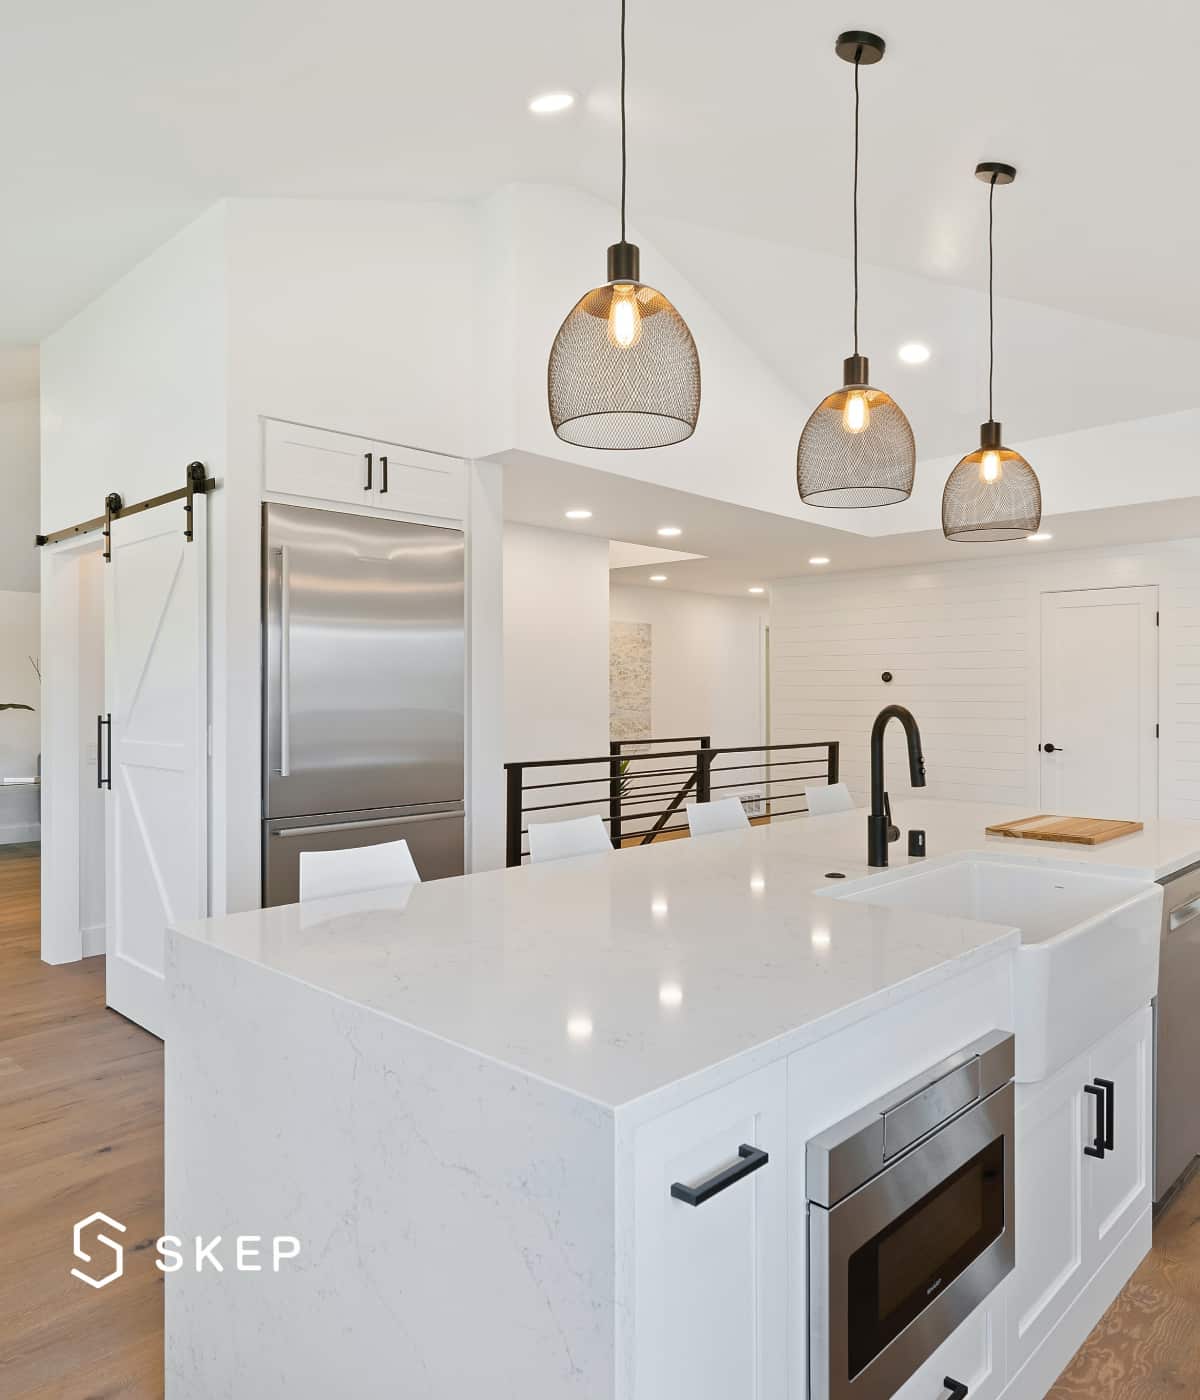 Skep Home